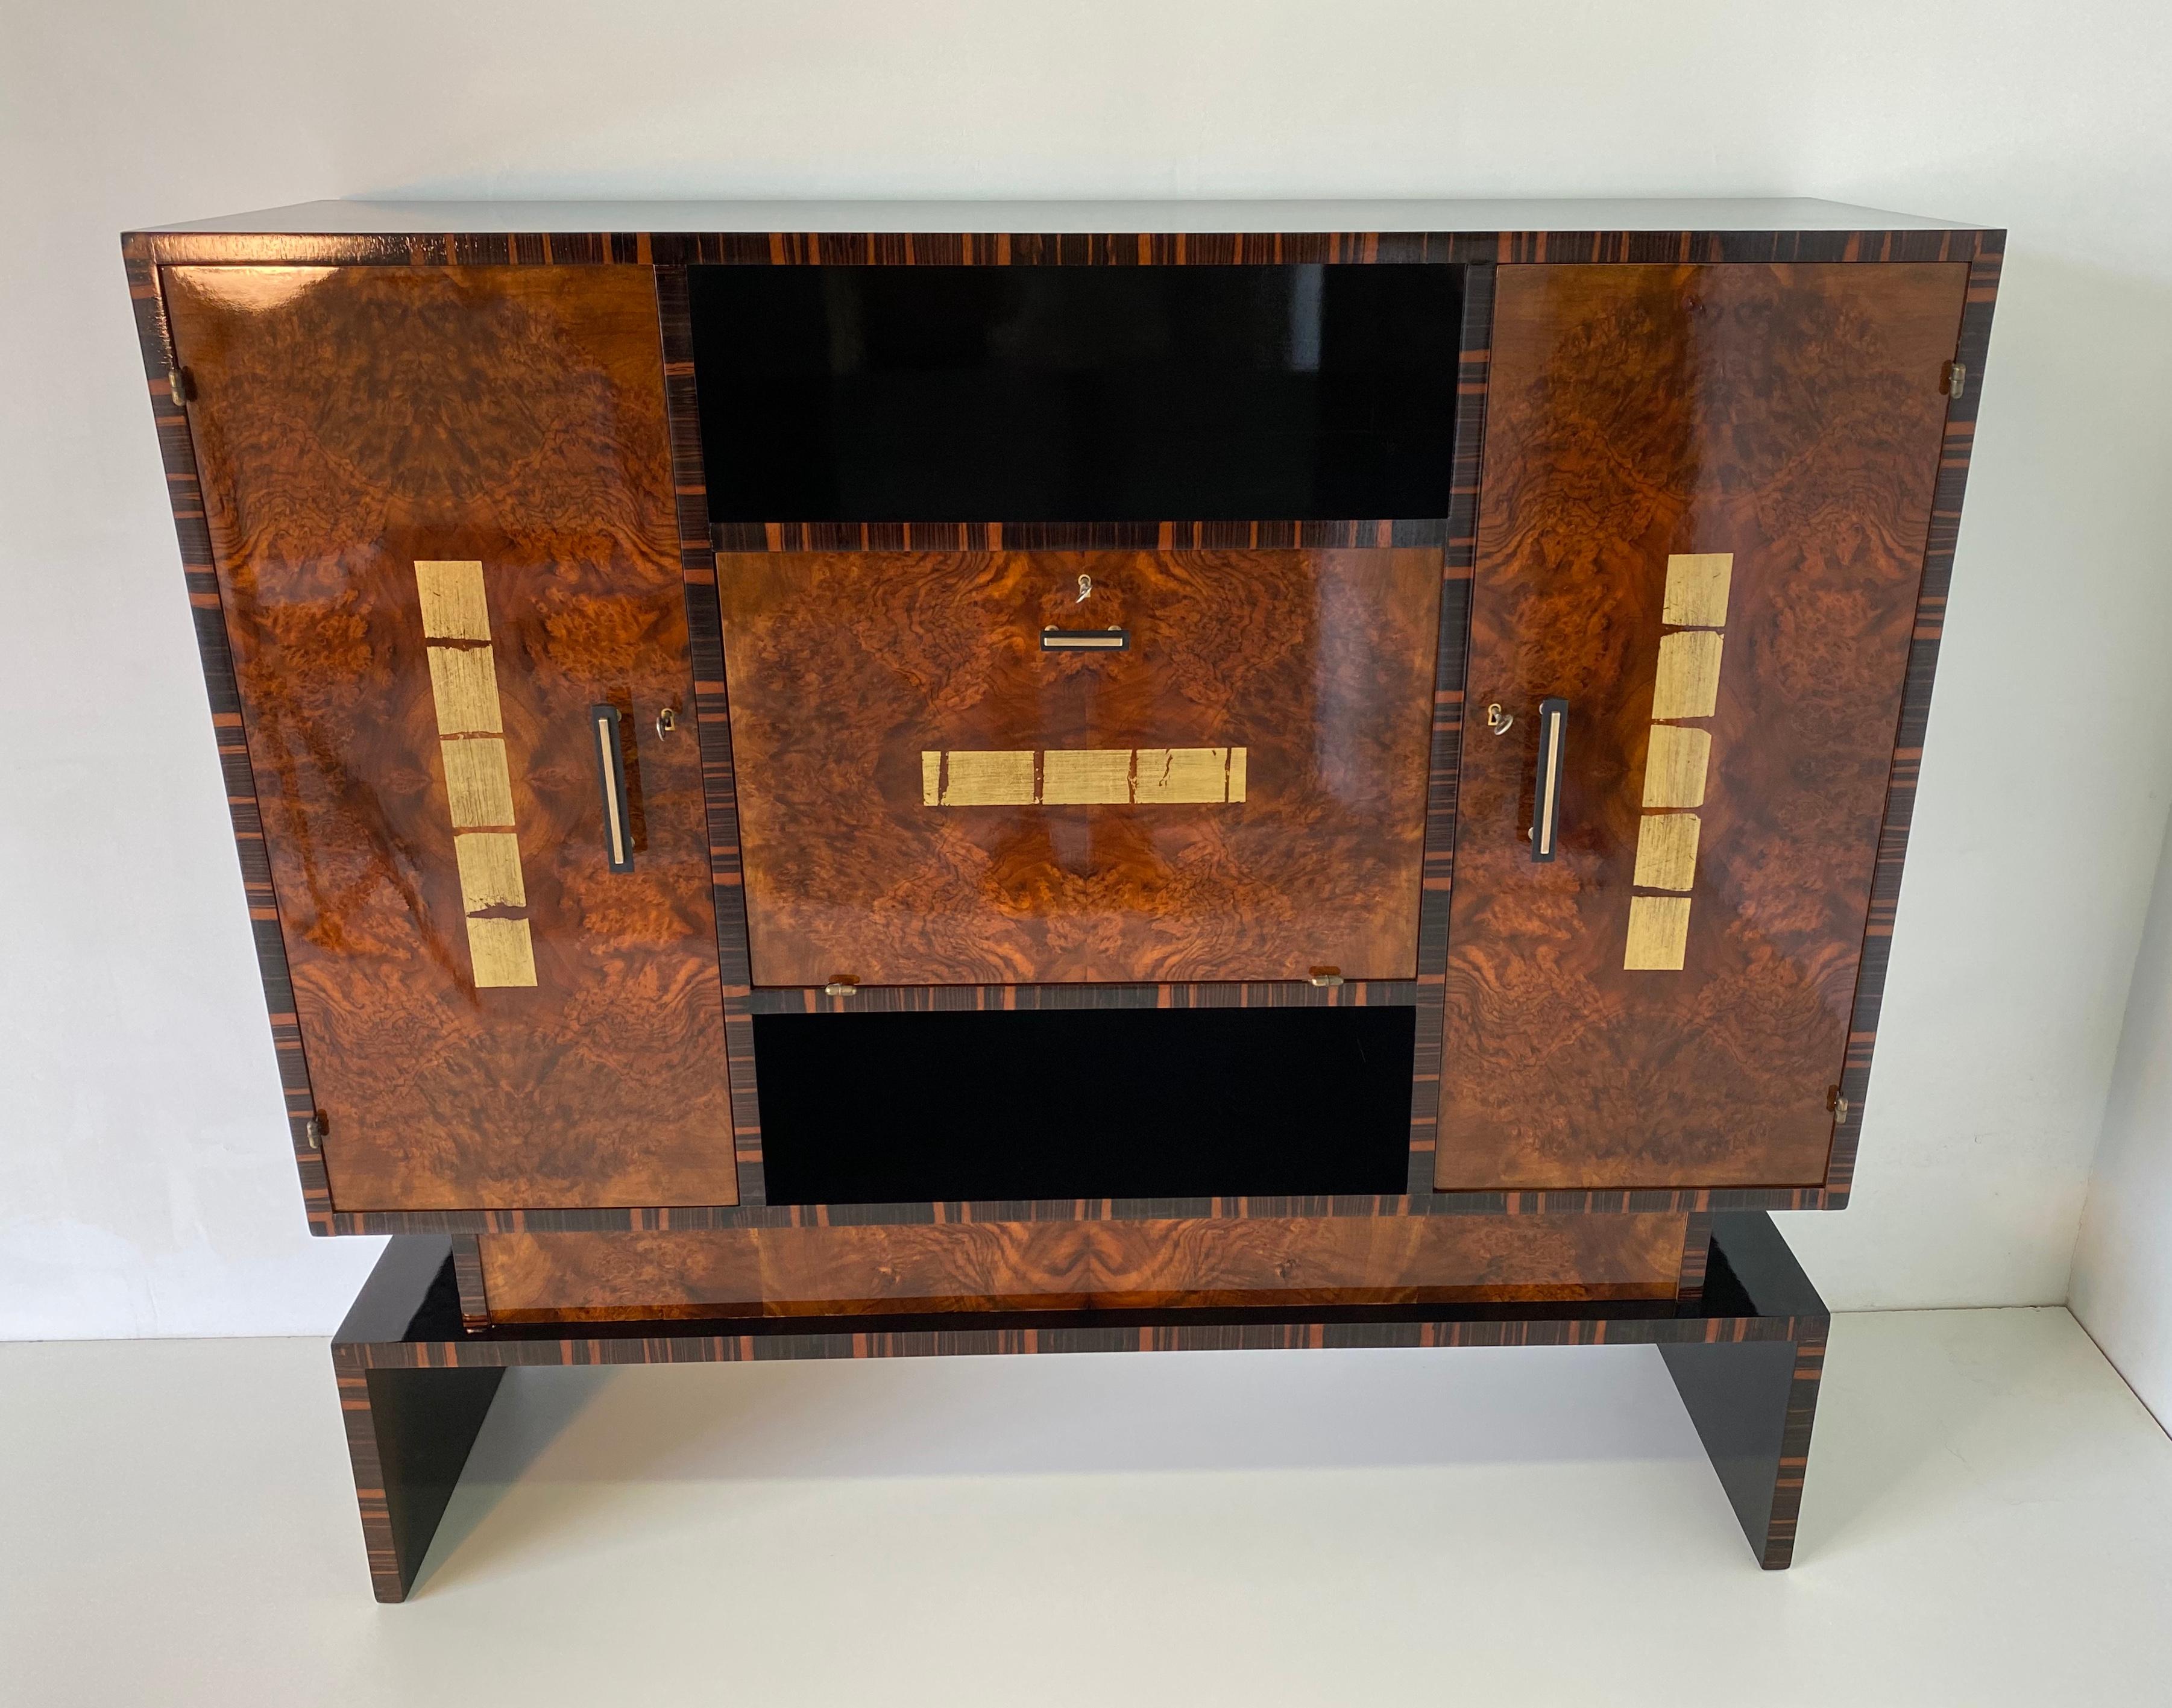 This rare cabinet was produced in Italy in the 1930s.
The structure is black lacquered while the profiles are in Macassar and the doors are in precious walnut briar.
Decorations on the doors are in gold leaf, the handles are in bakelite and